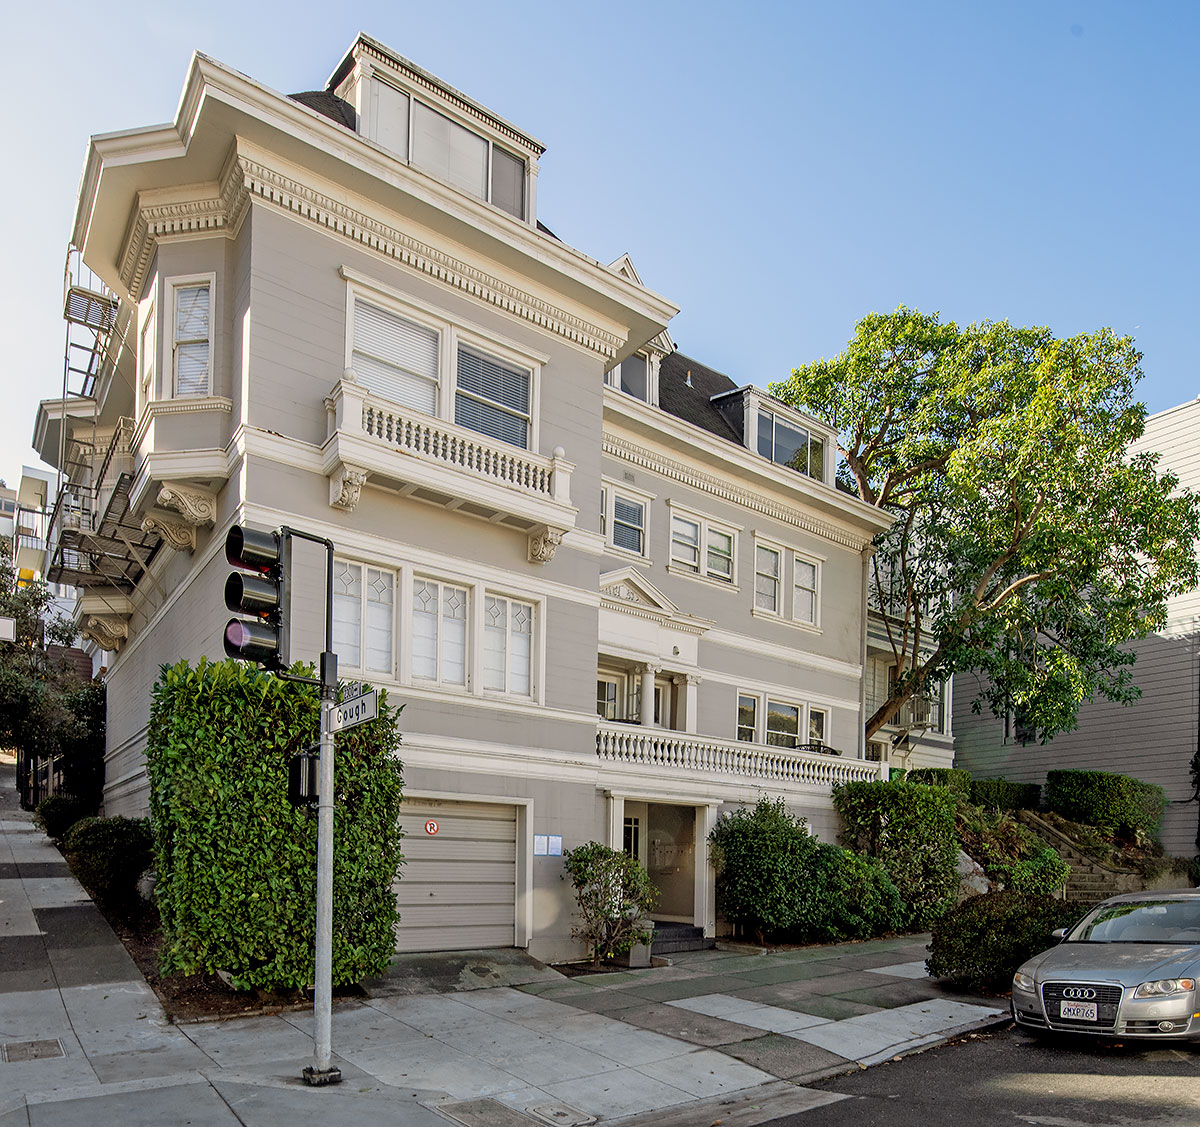 1901 Pacific Avenue in Pacific Heights was designed by Newsom & Newsom and built in 1899.